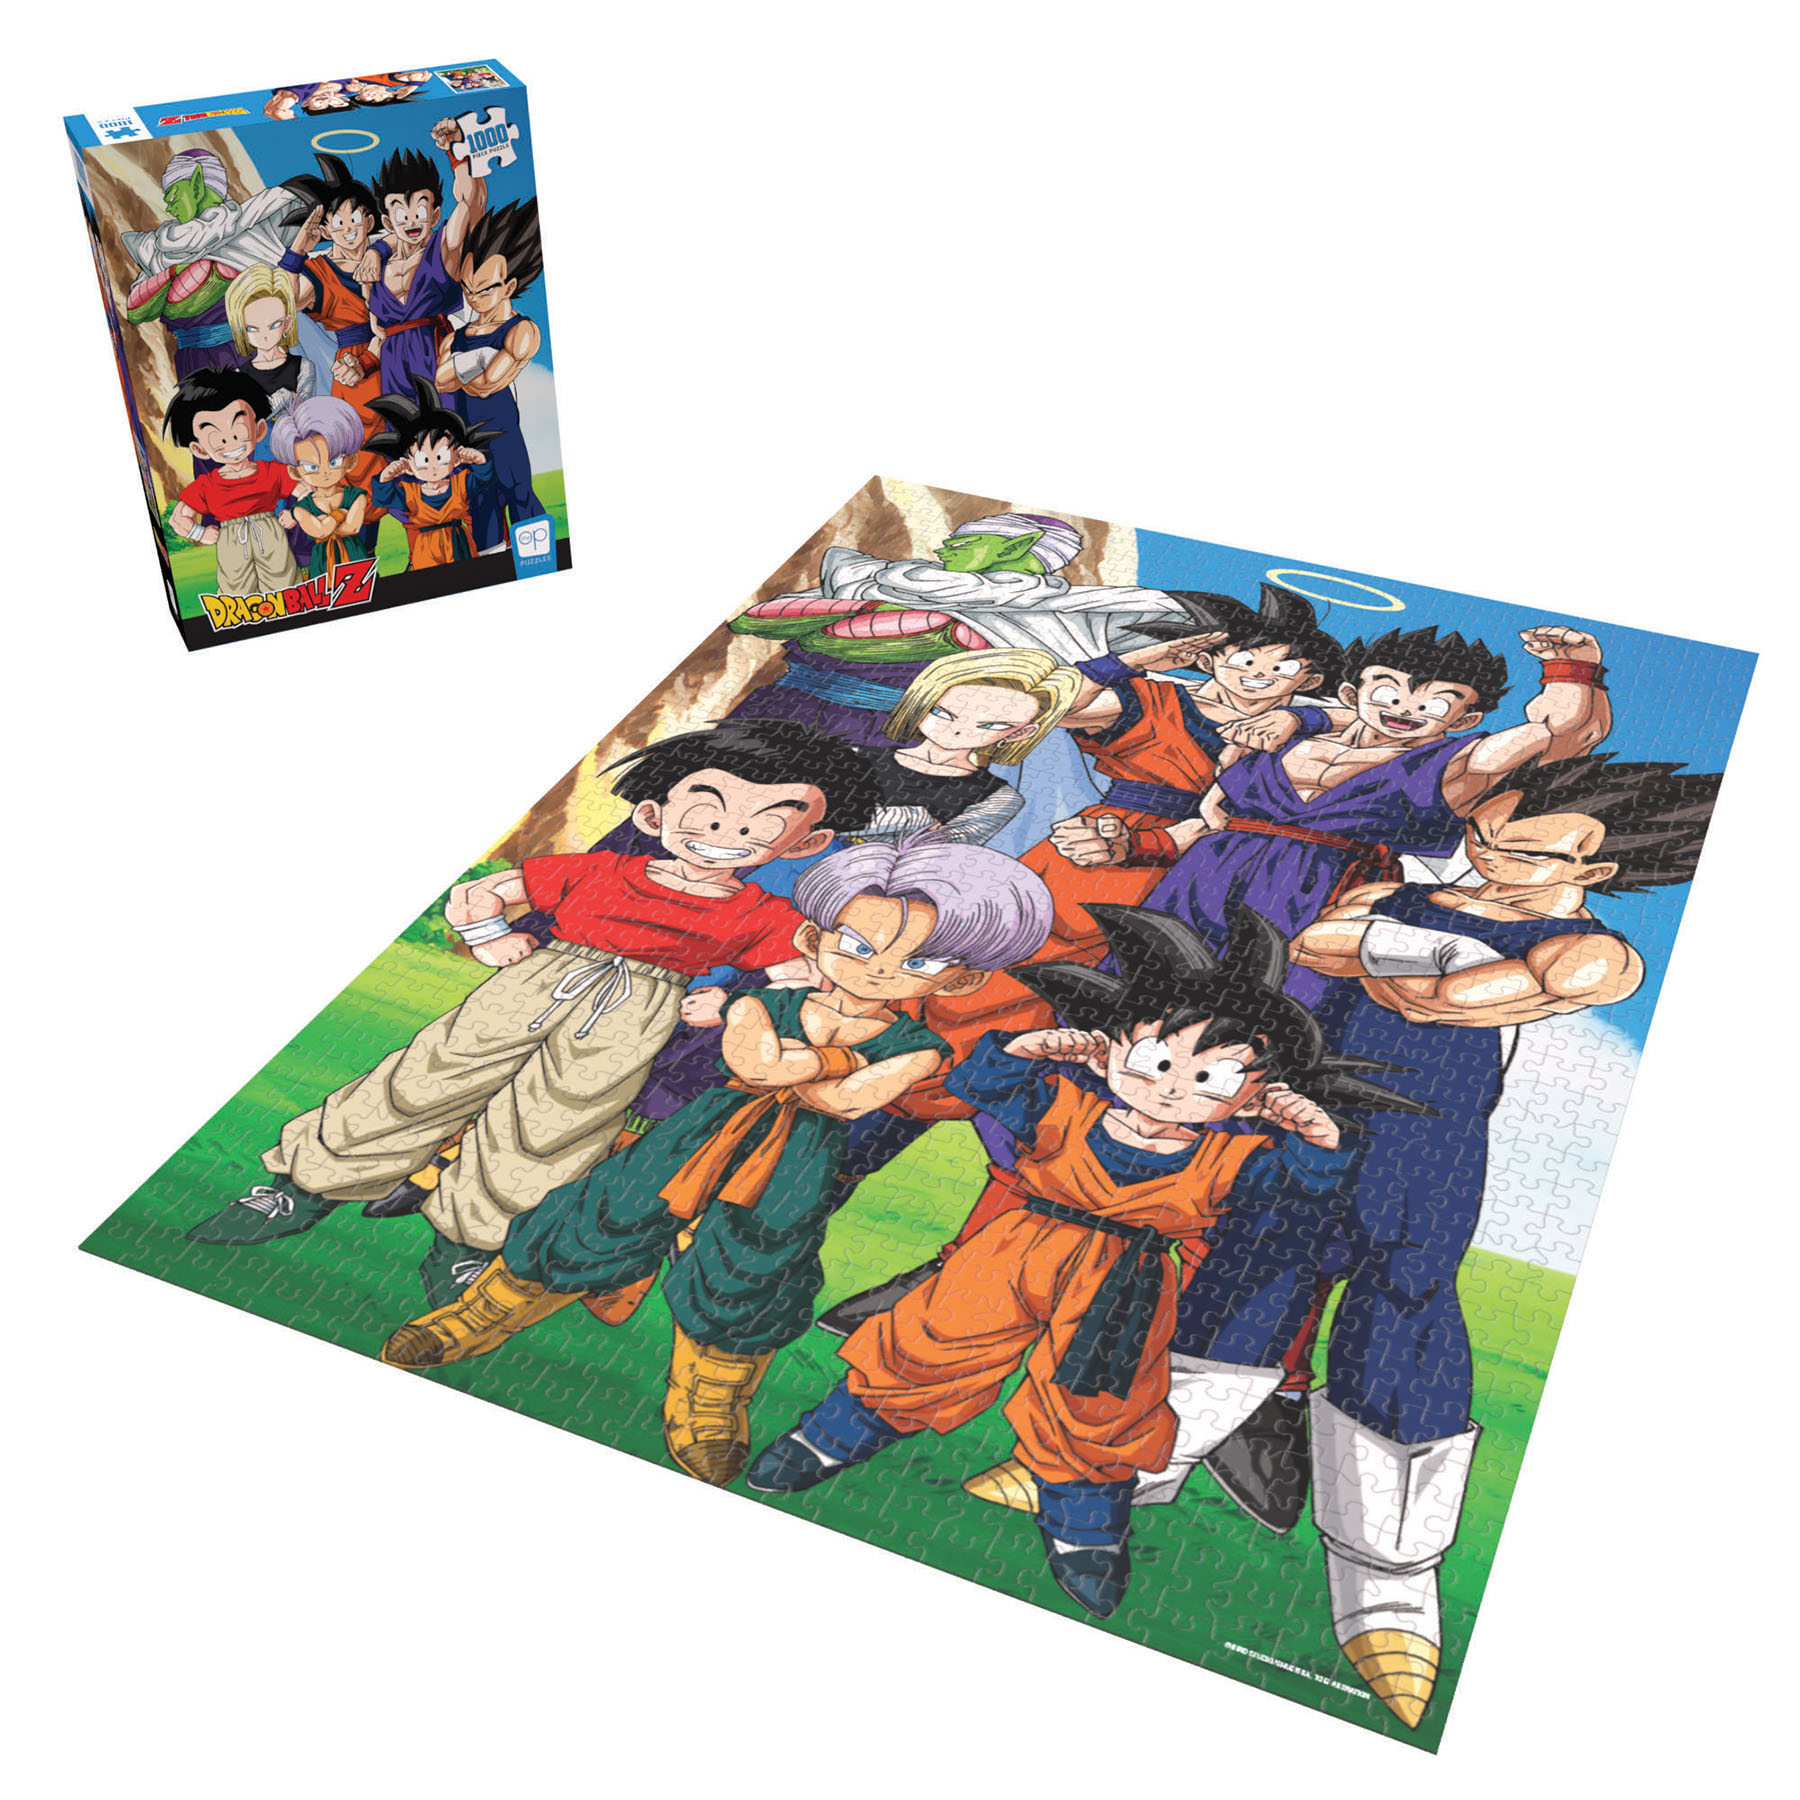 USAopoly DRAGON BALL Z "Z FIGHTERS" 1000-Piece Puzzle